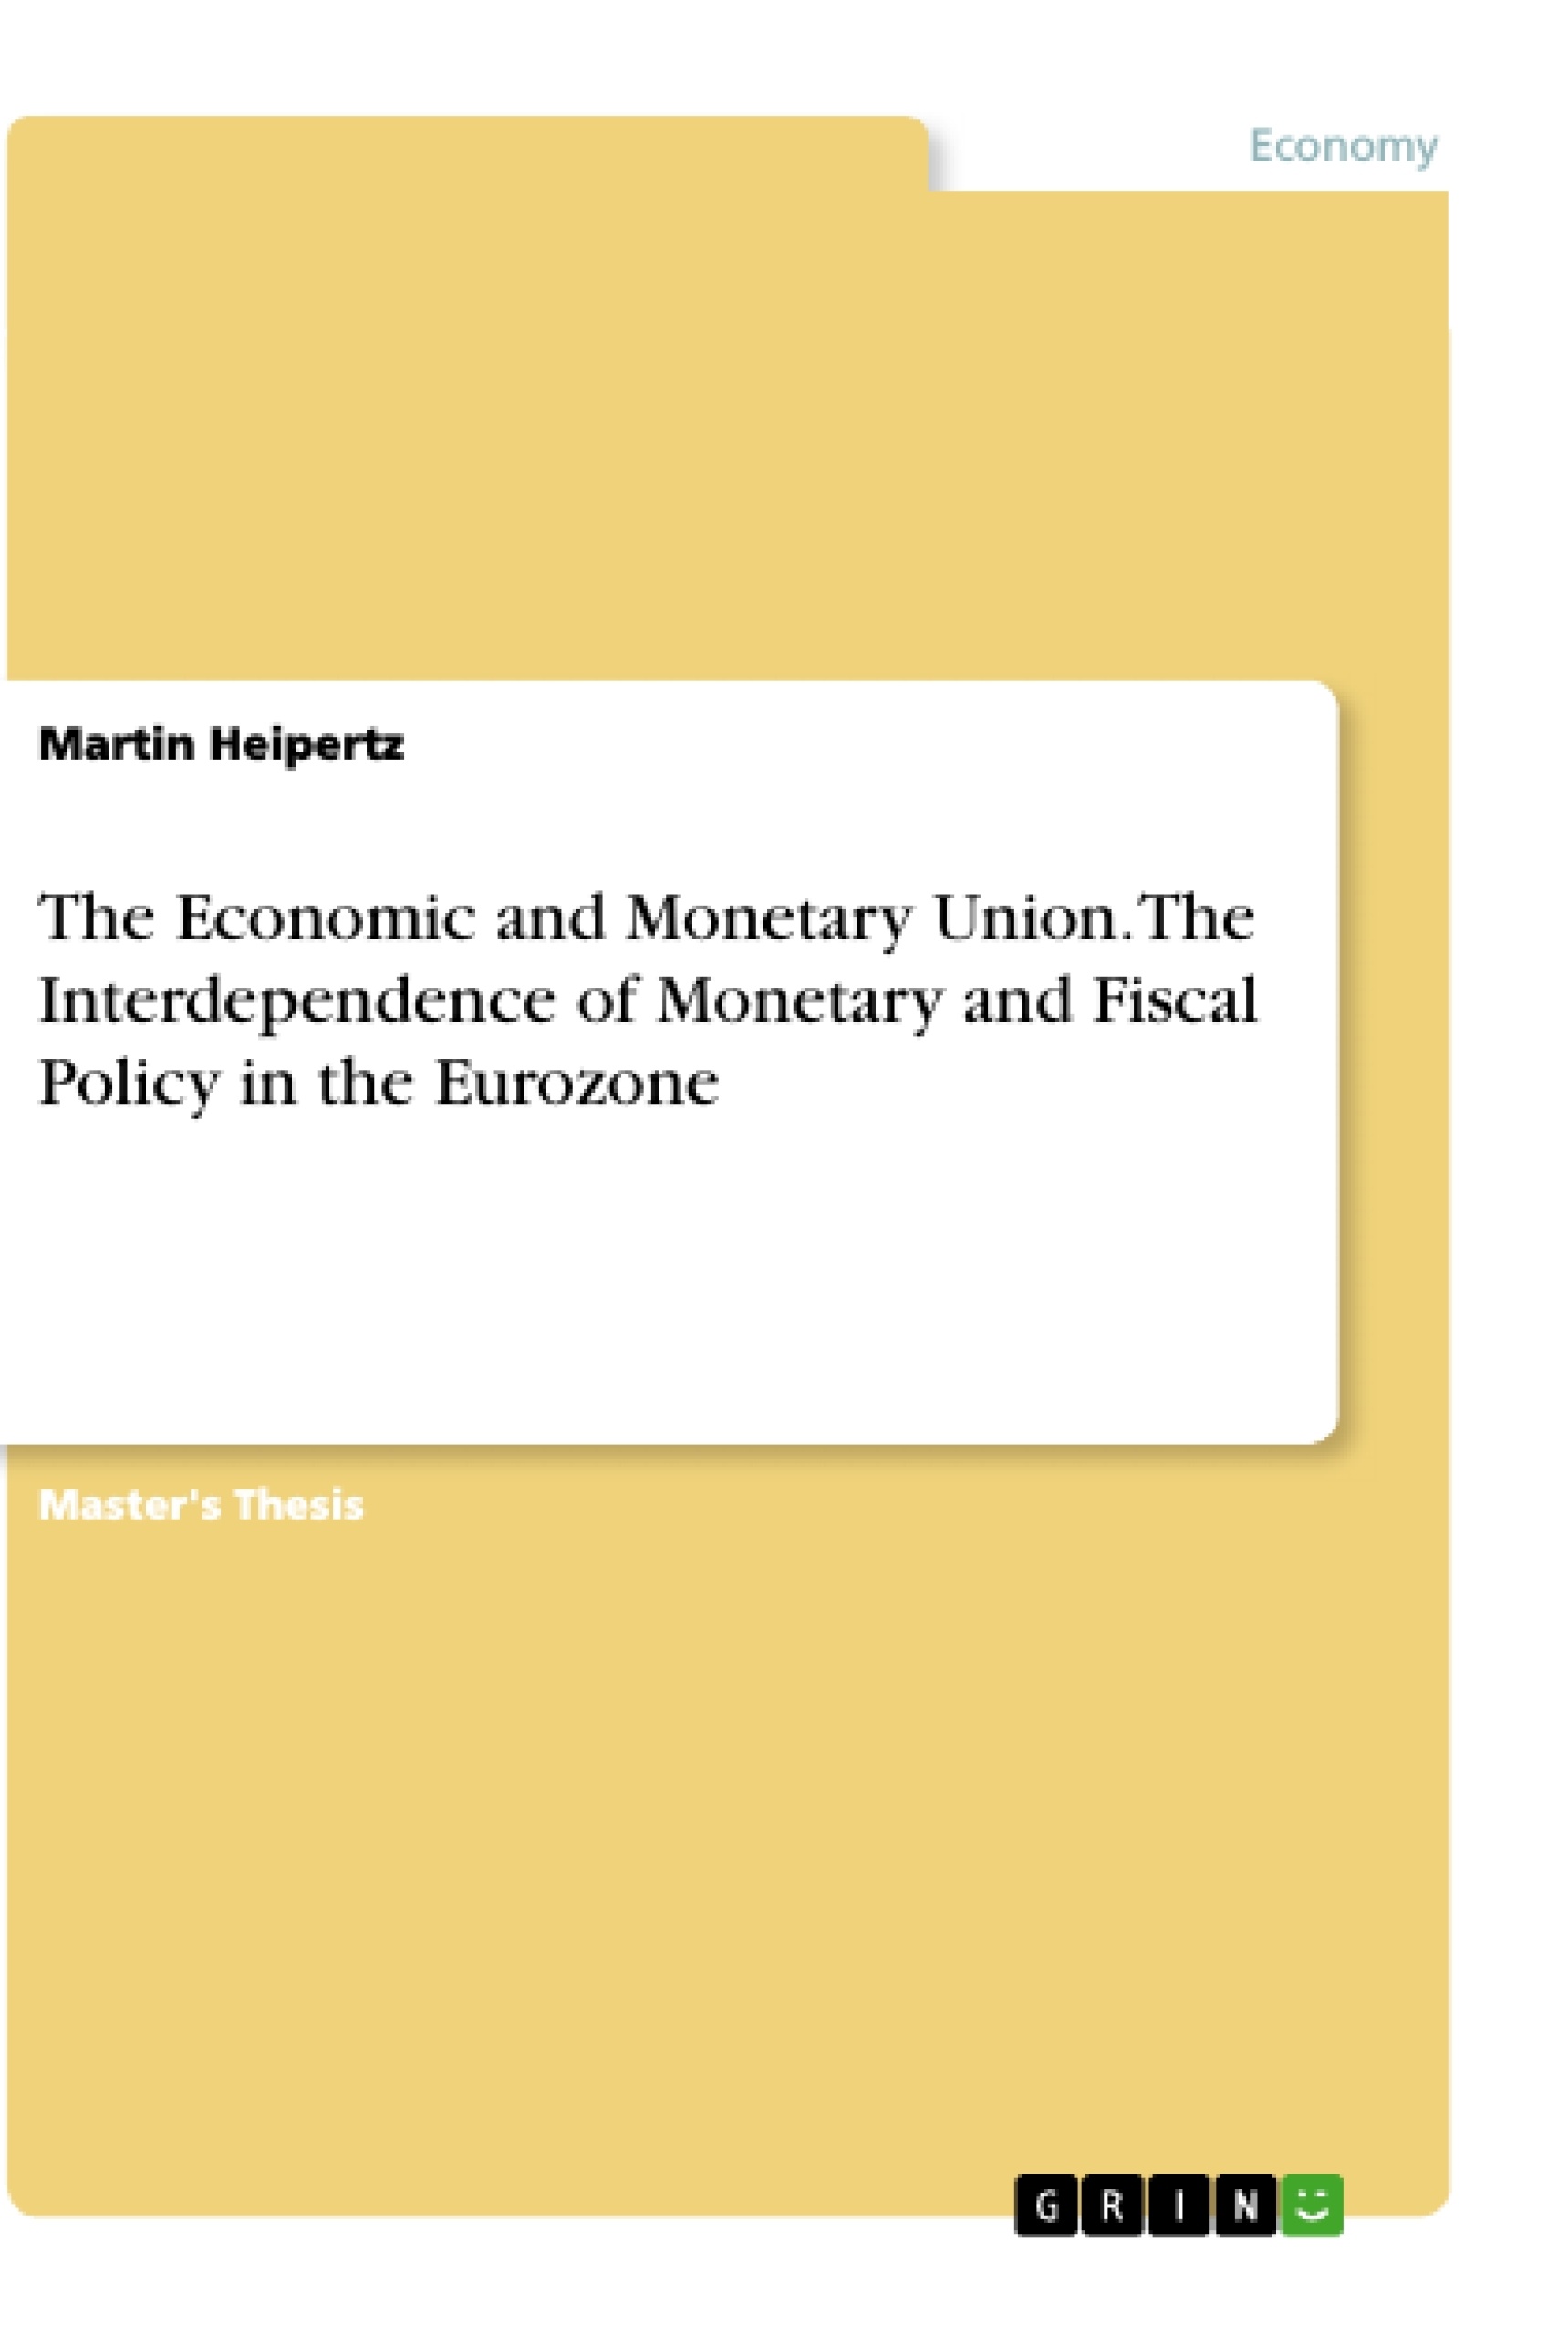 Titre: The Economic and Monetary Union. The Interdependence of Monetary and Fiscal Policy in the Eurozone